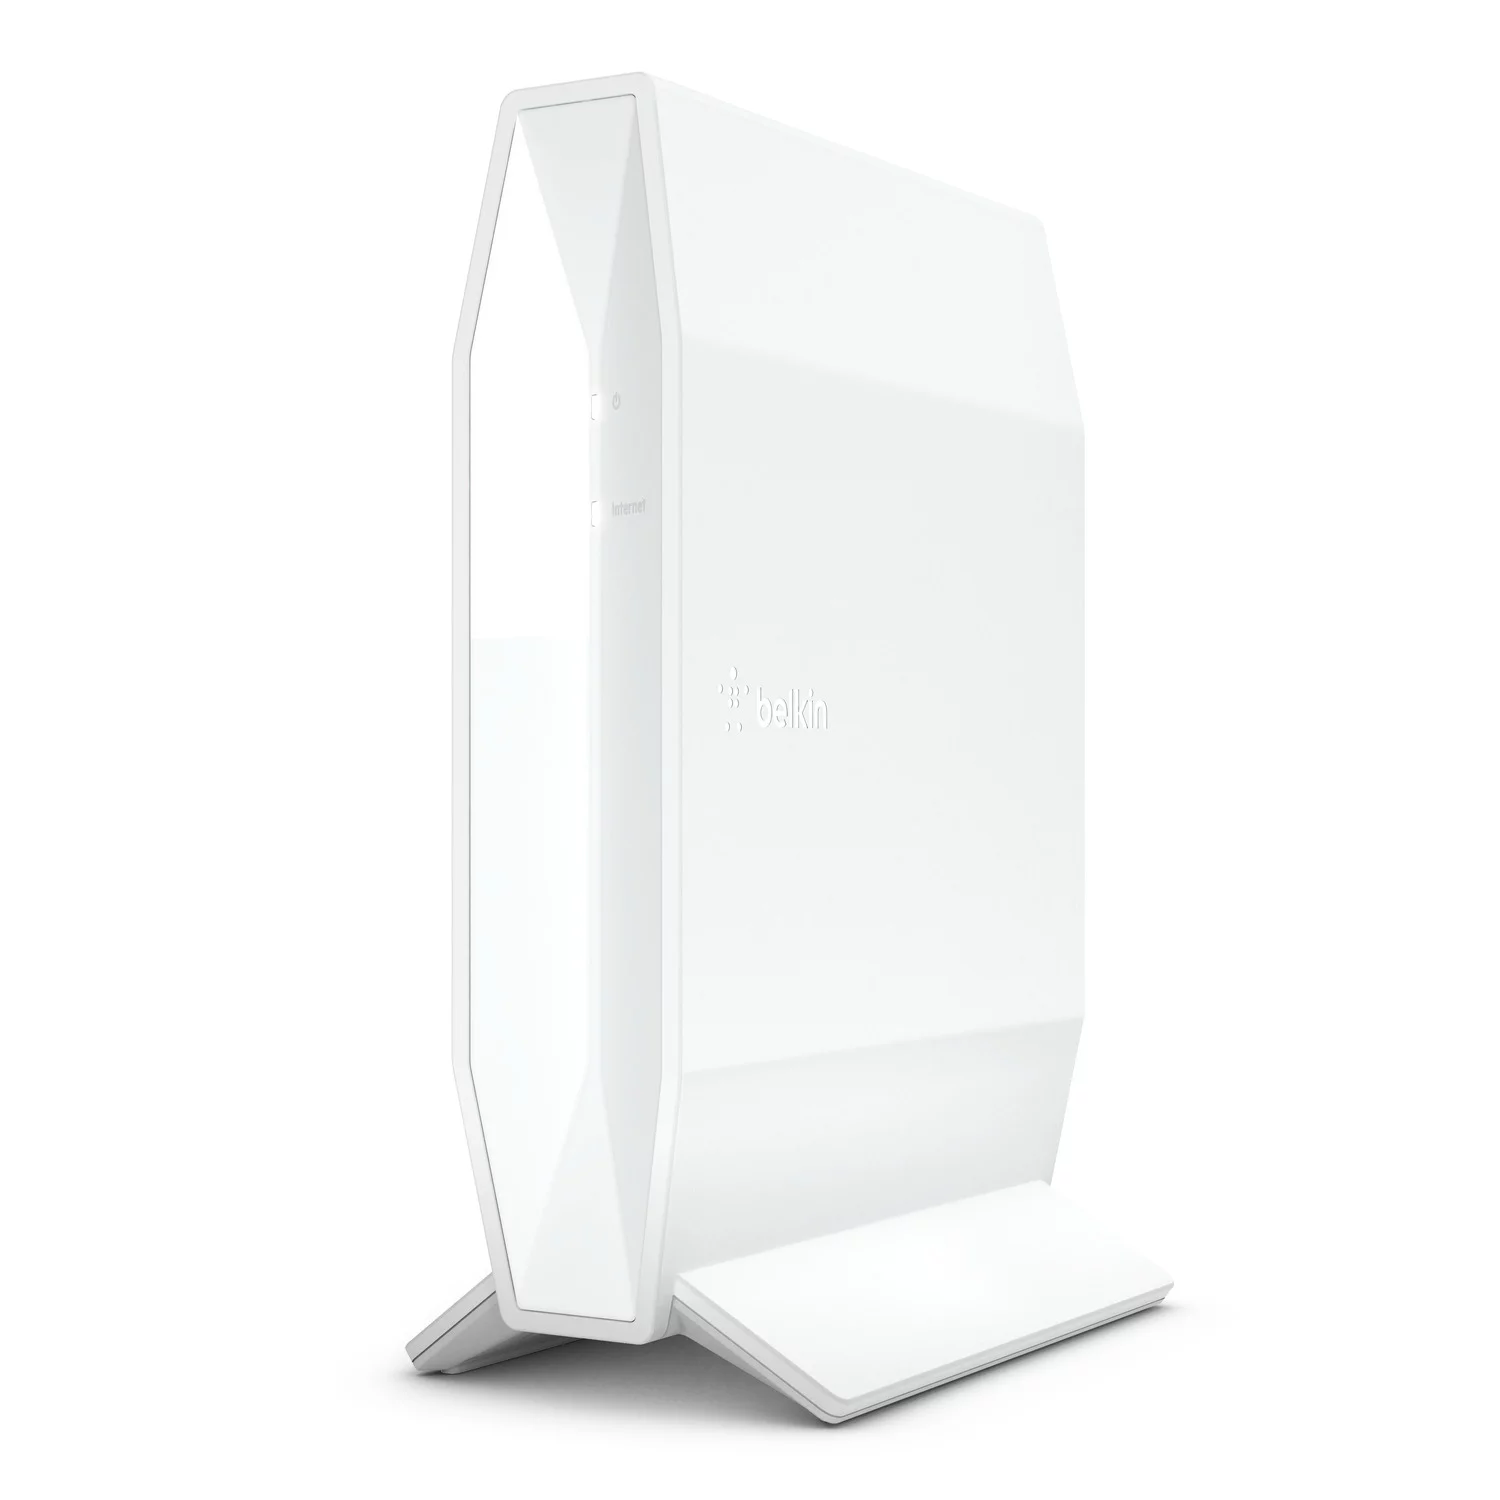 Belkin Dual Band AX1800 Wifi 6 Router, 1.8 Gbps, White (RT1800)